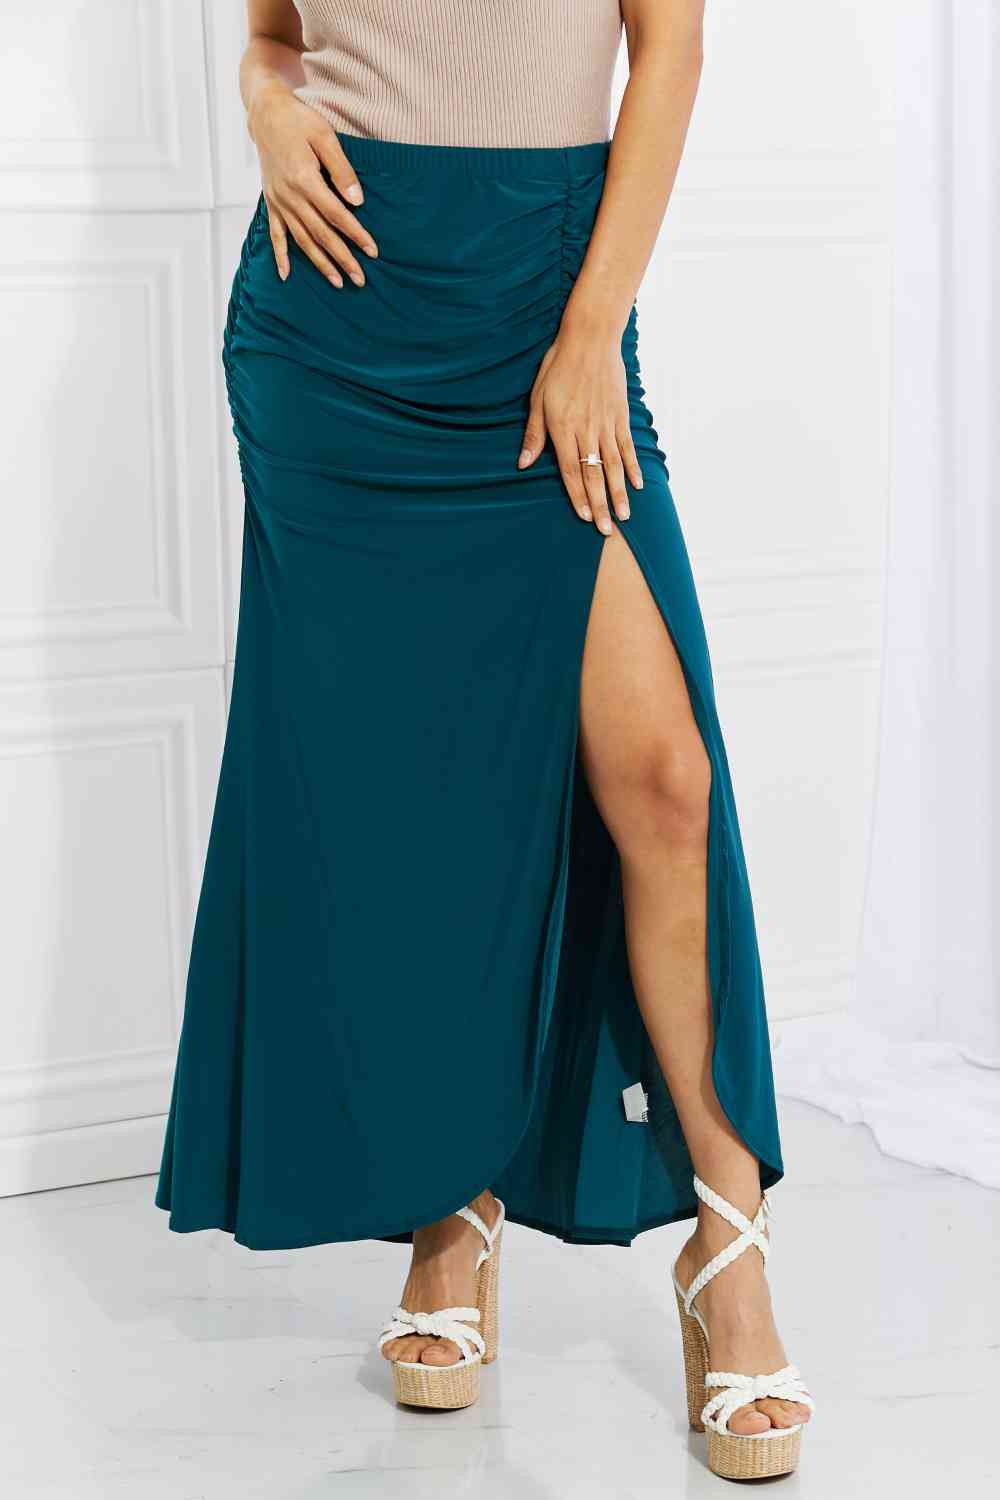 White Birch Full Size Up and Up Ruched Slit Maxi Skirt in Teal Teal